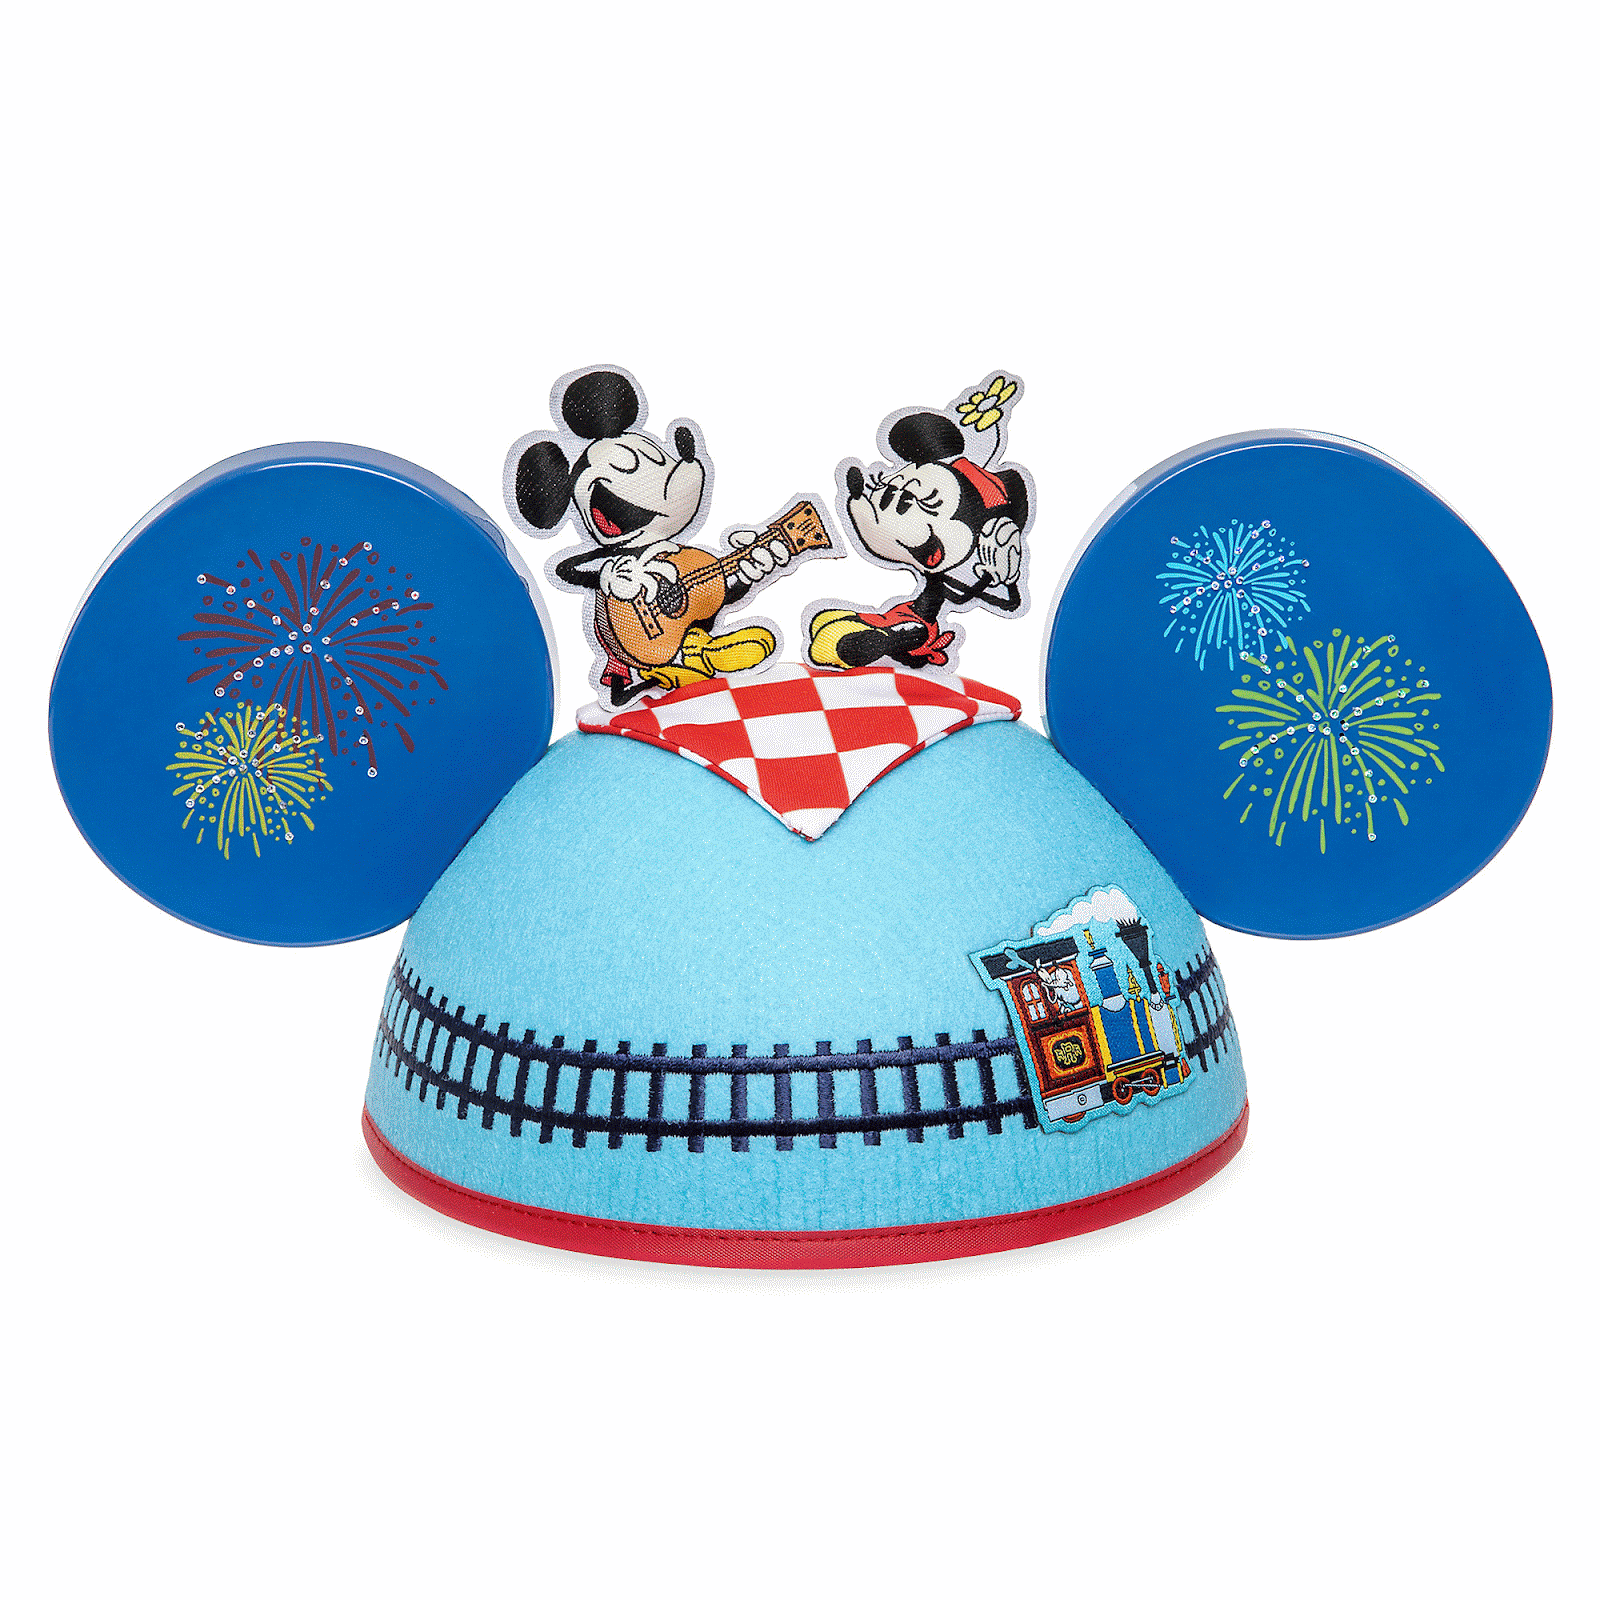 Take a Closer Look At The Bret Iwan Designer Mickey Ears